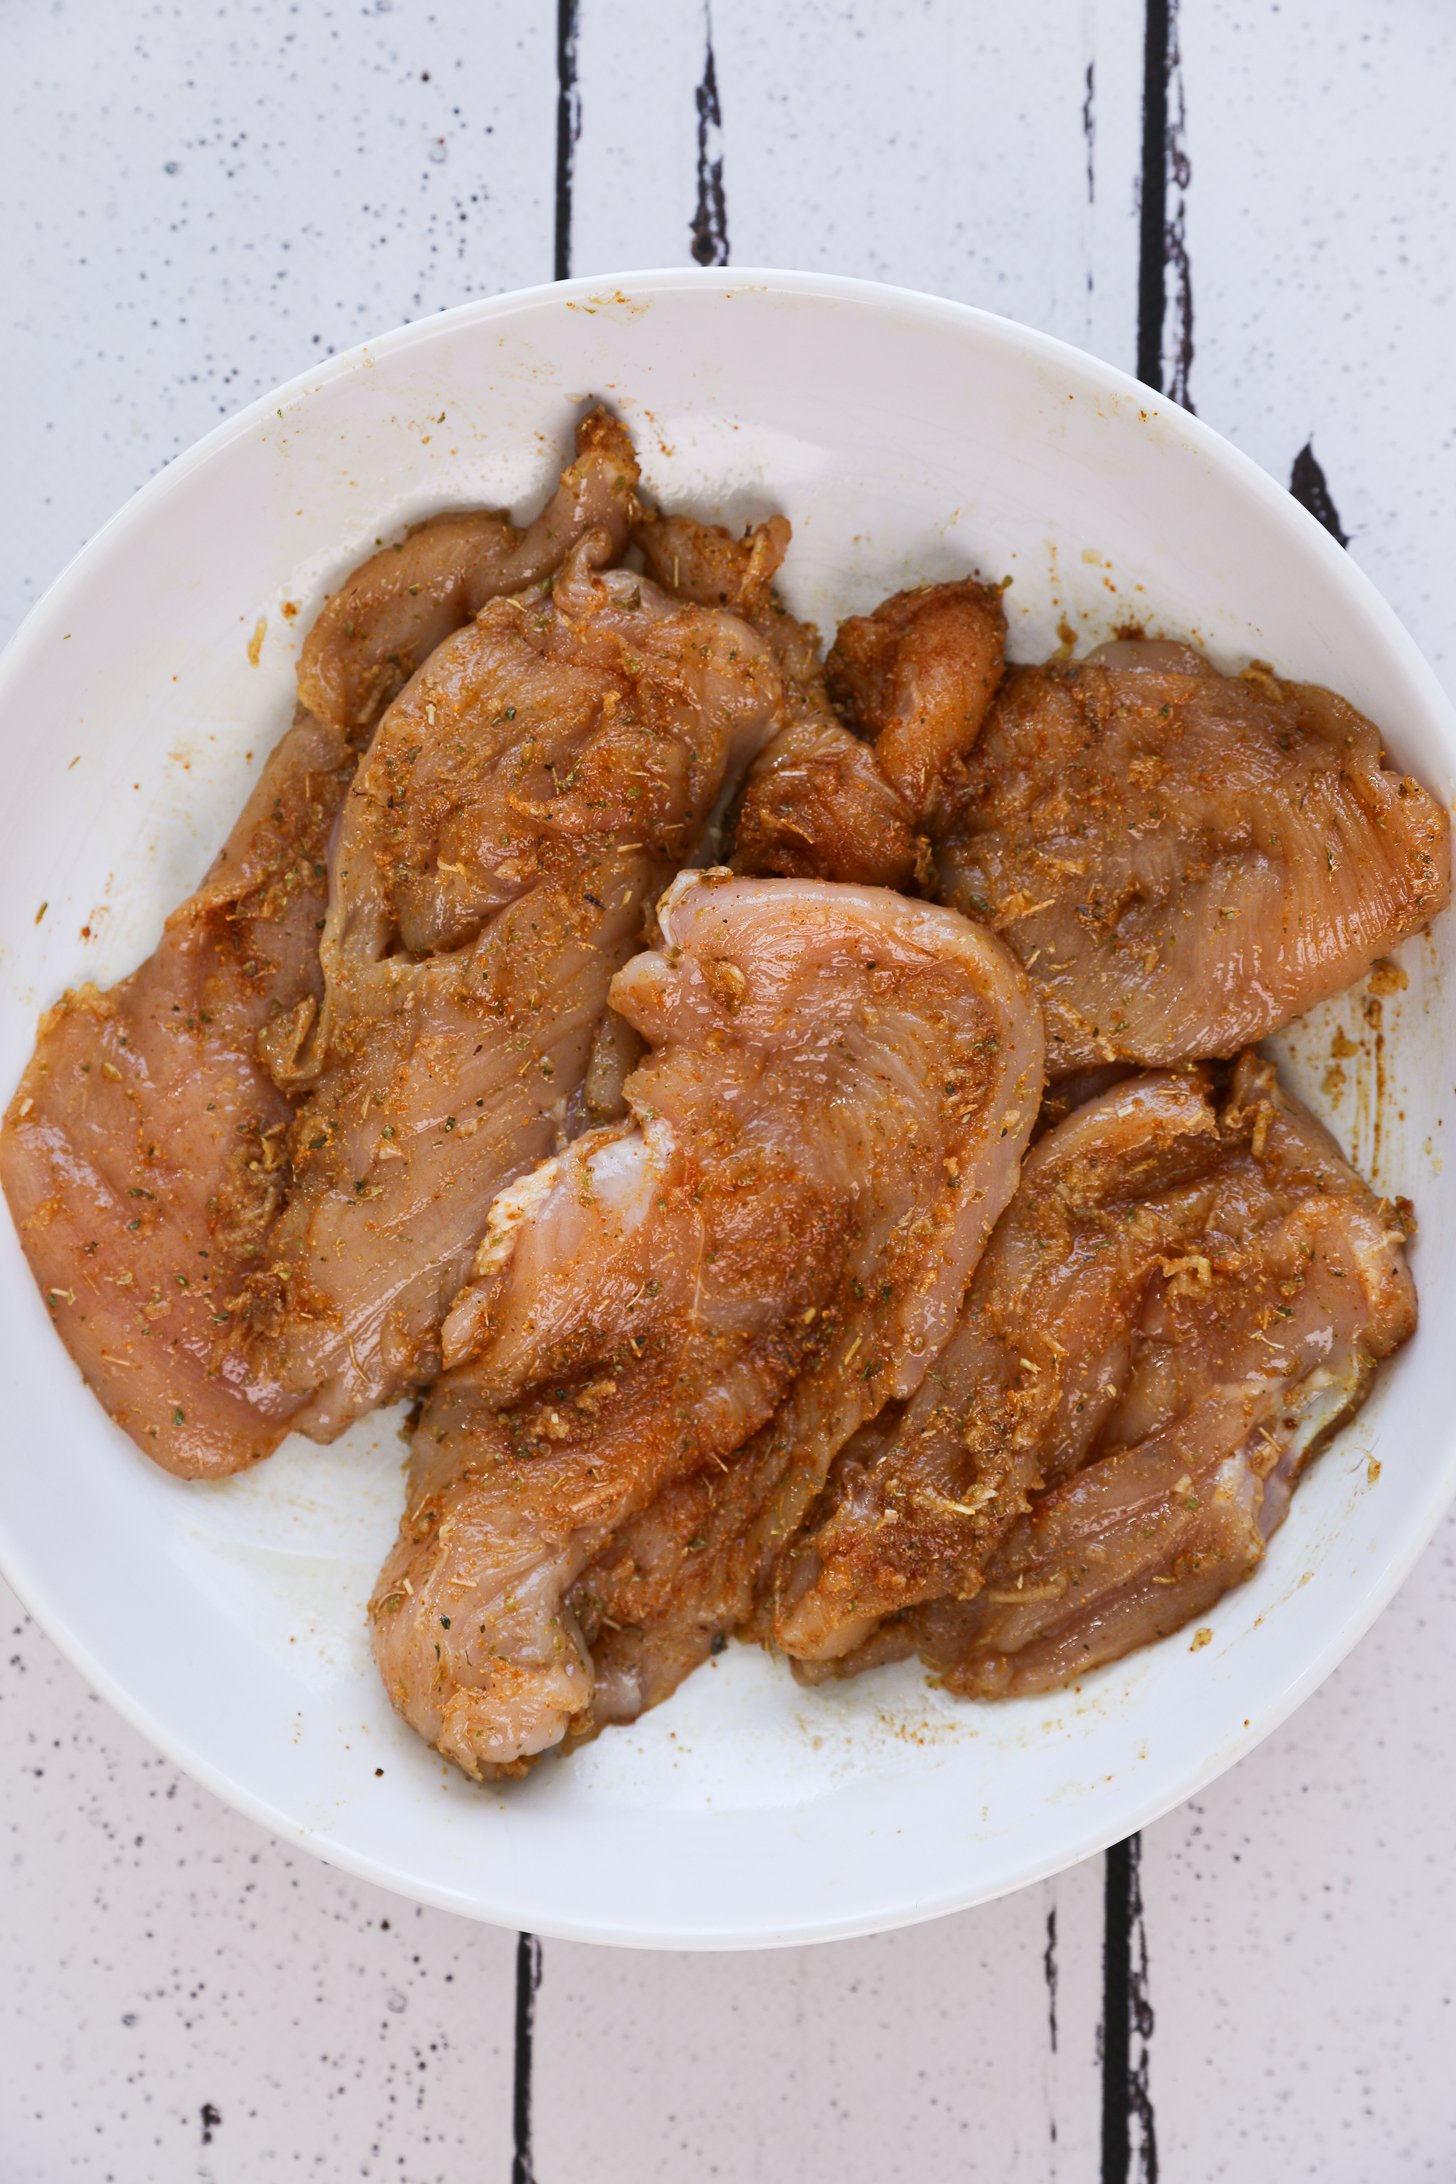 Spice-marinated slices of chicken in a bowl.